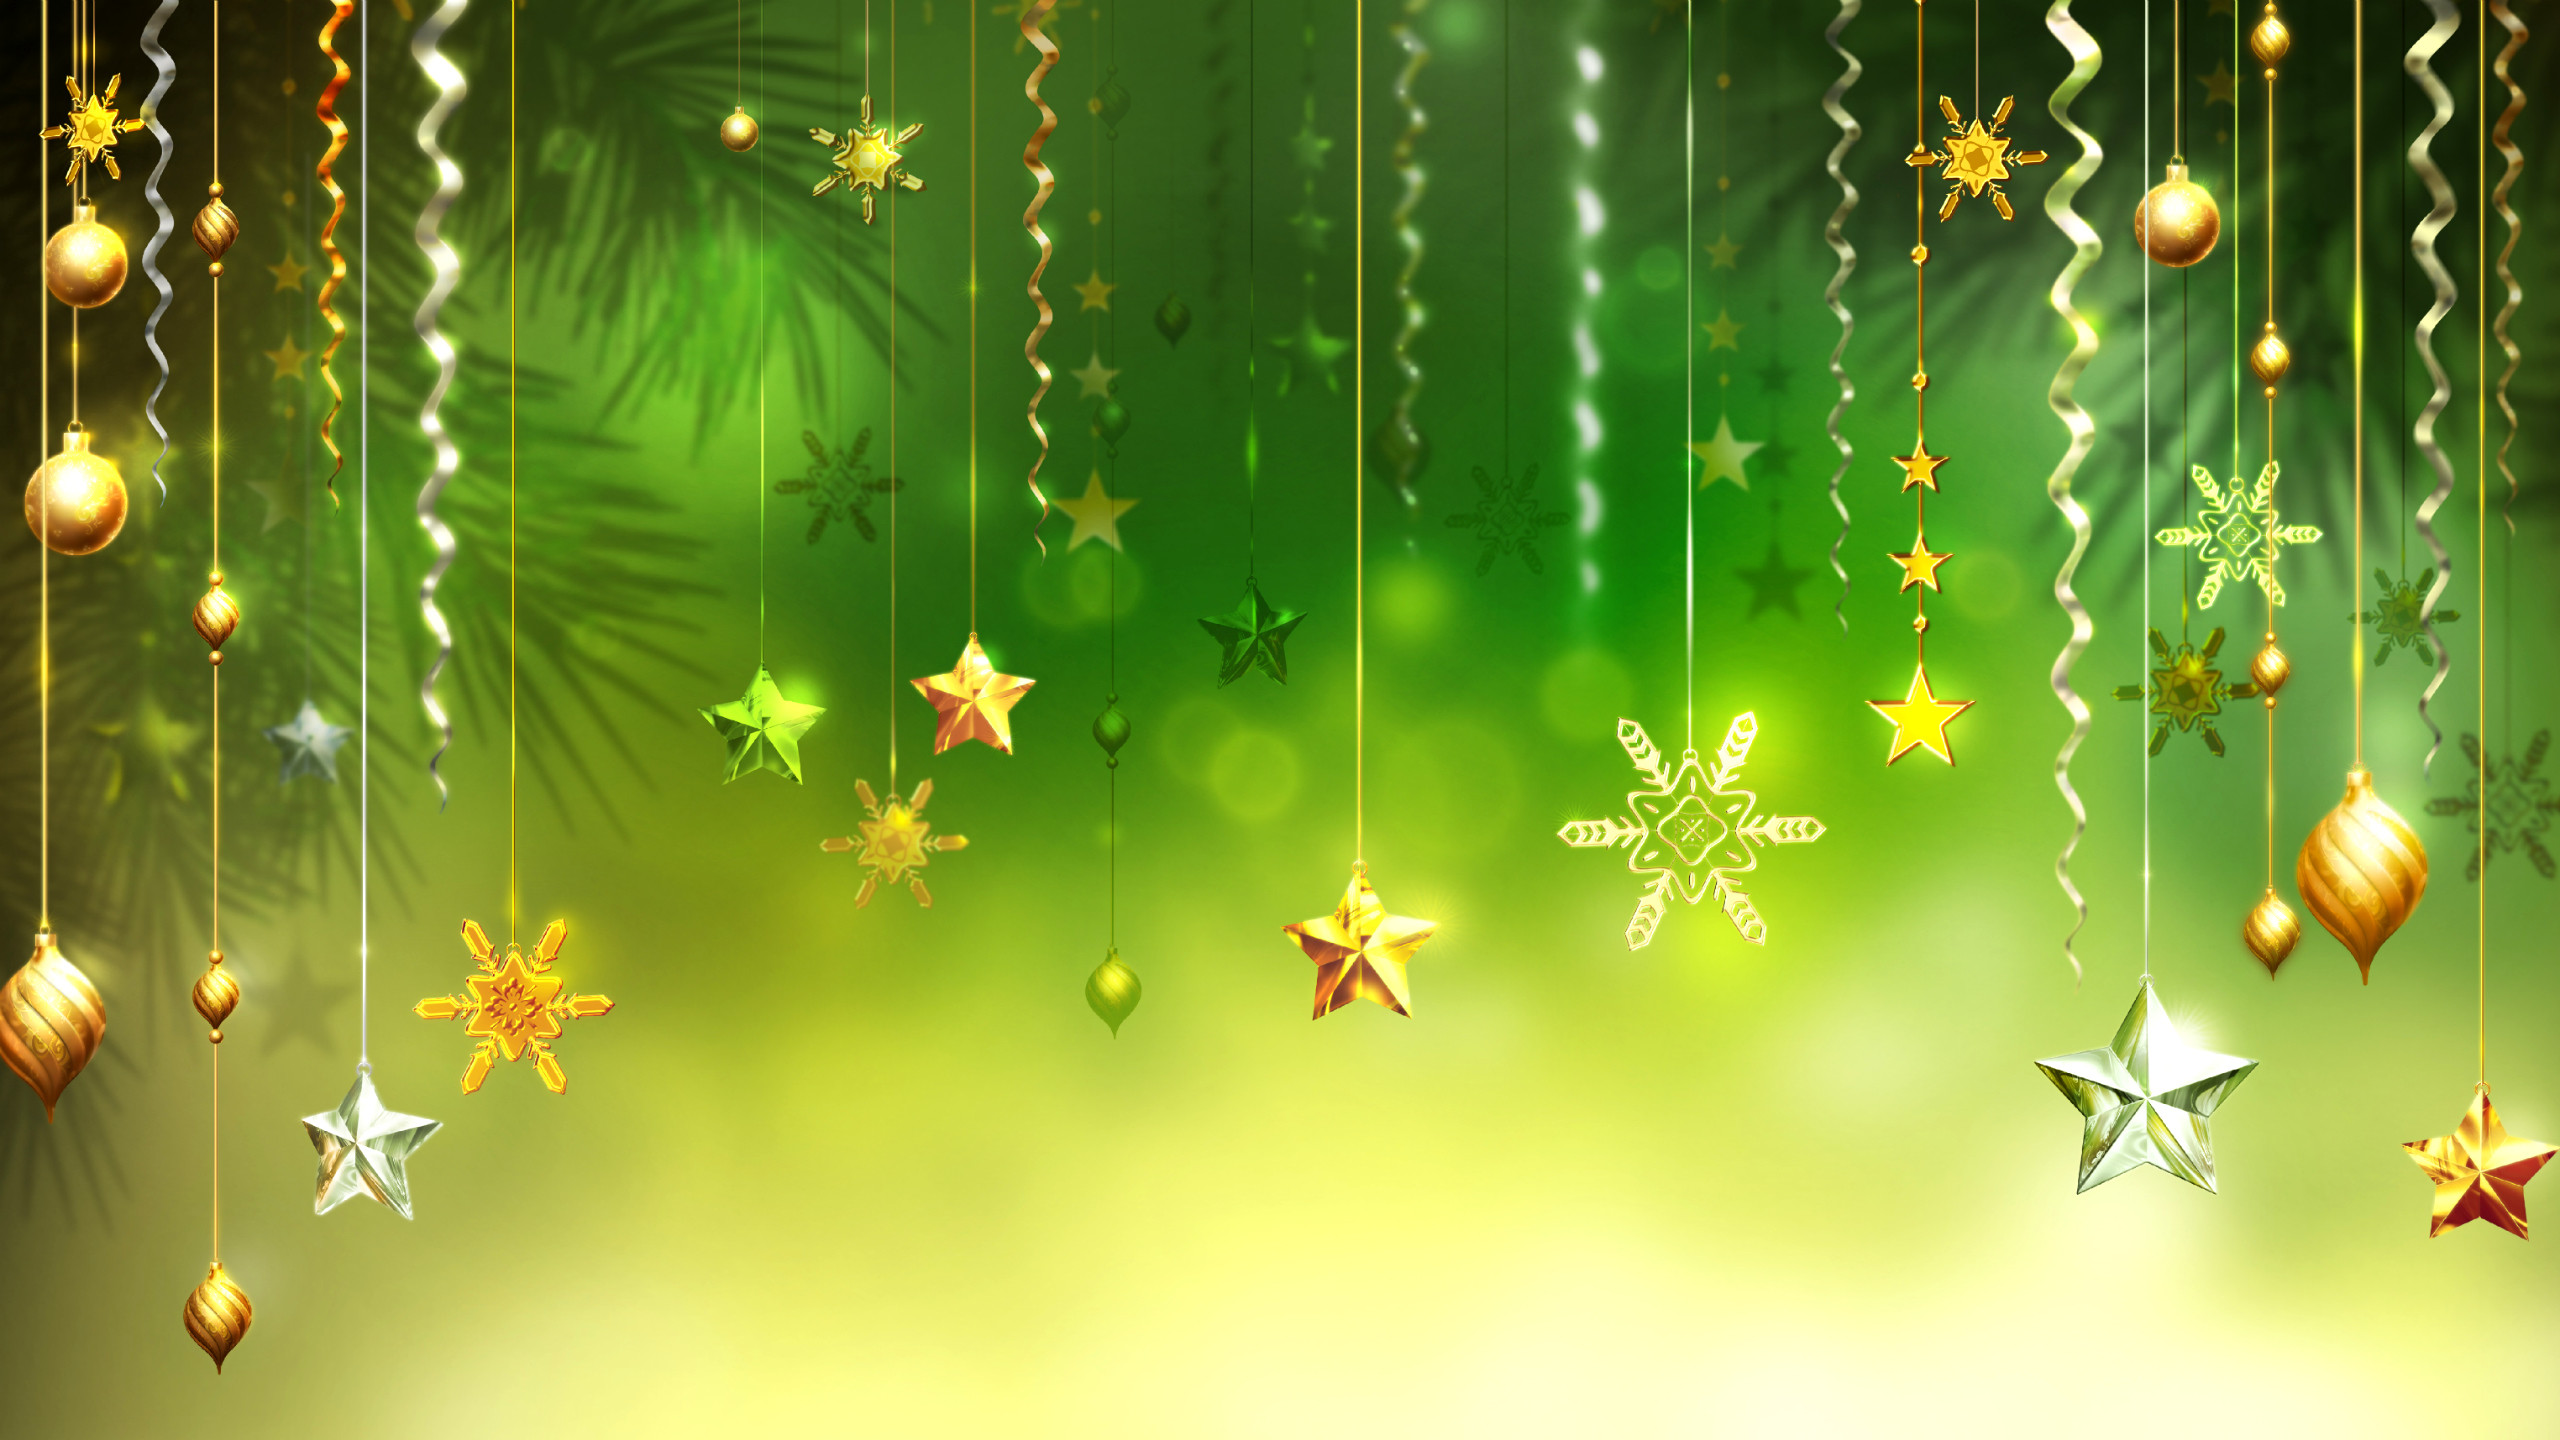 2560x1440 Christmas images Merry Christmas HD wallpaper and background photos